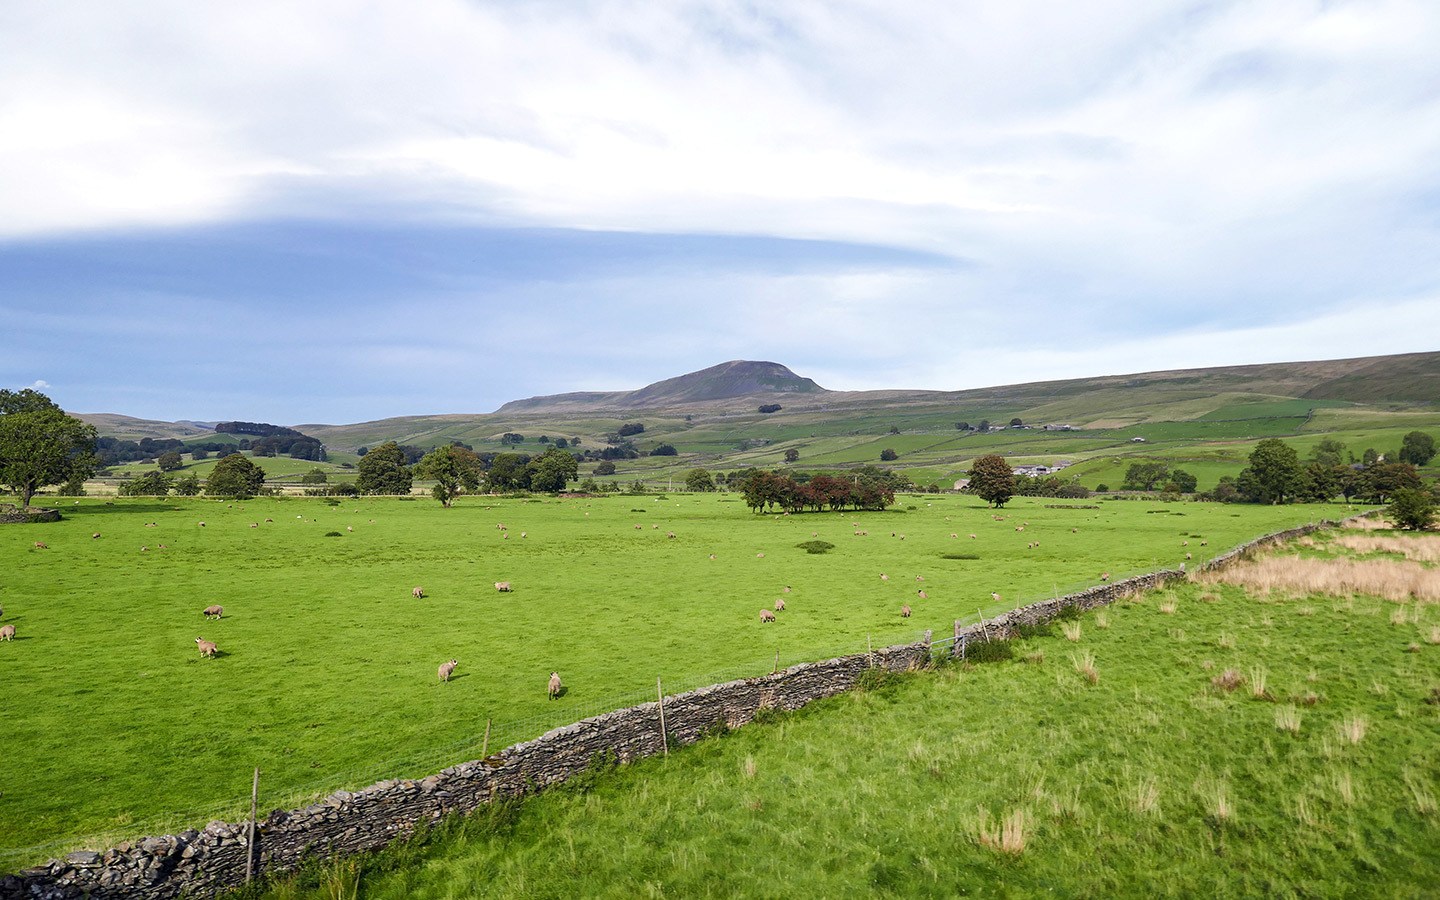 Views along the Settle to Carlisle Railway route